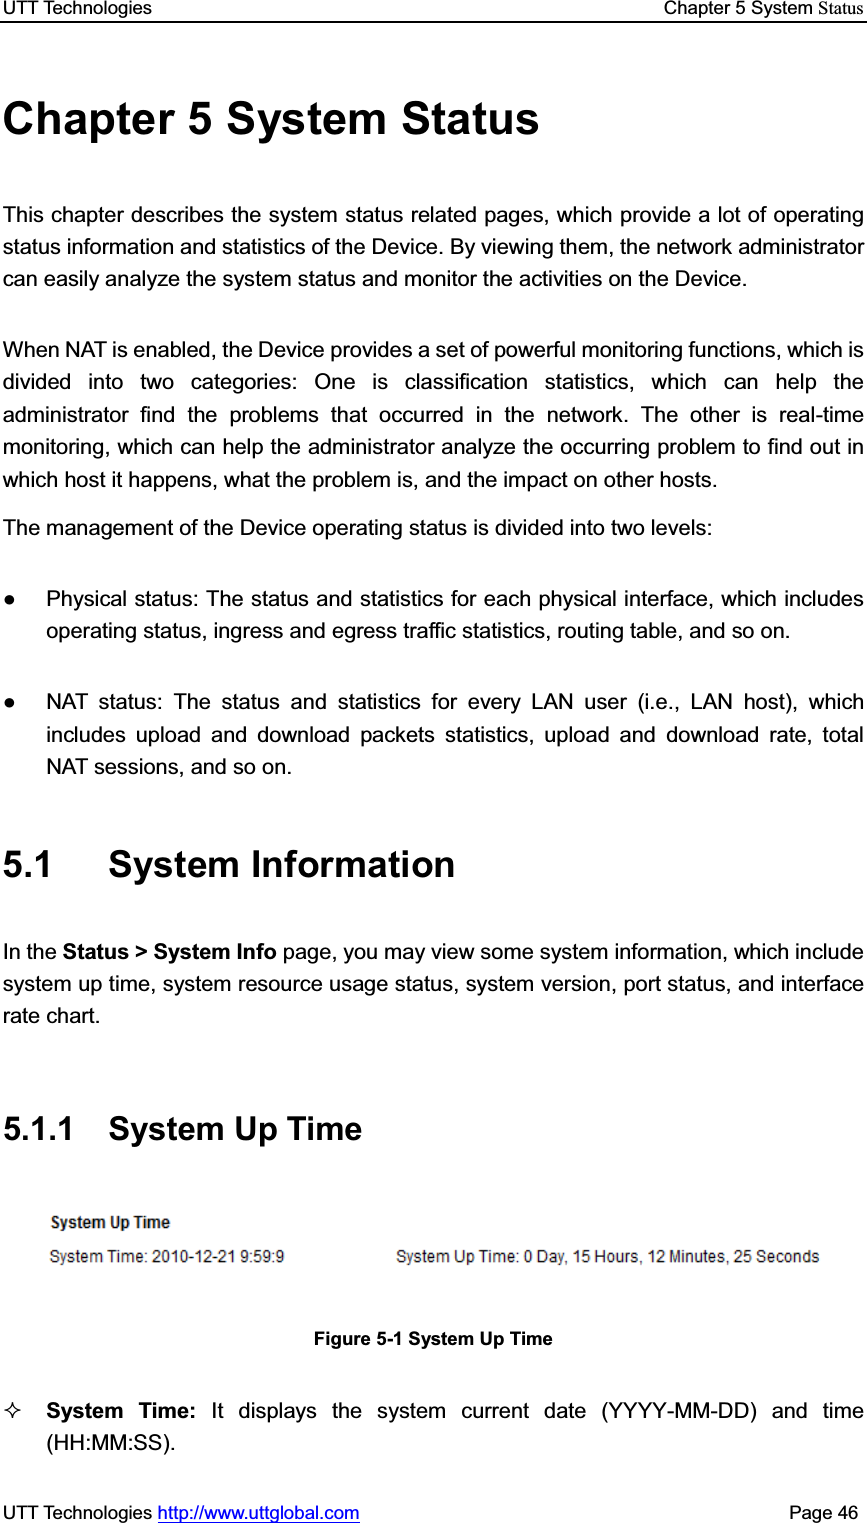 UTT Technologies    Chapter 5 System StatusUTT Technologies http://www.uttglobal.com                                              Page 46 Chapter 5 System Status This chapter describes the system status related pages, which provide a lot of operating status information and statistics of the Device. By viewing them, the network administrator can easily analyze the system status and monitor the activities on the Device. When NAT is enabled, the Device provides a set of powerful monitoring functions, which is divided into two categories: One is classification statistics, which can help the administrator find the problems that occurred in the network. The other is real-time monitoring, which can help the administrator analyze the occurring problem to find out in which host it happens, what the problem is, and the impact on other hosts. The management of the Device operating status is divided into two levels:   Ɣ  Physical status: The status and statistics for each physical interface, which includes operating status, ingress and egress traffic statistics, routing table, and so on. Ɣ  NAT status: The status and statistics for every LAN user (i.e., LAN host), which includes upload and download packets statistics, upload and download rate, total NAT sessions, and so on. 5.1 System Information In the Status &gt; System Info page, you may view some system information, which include system up time, system resource usage status, system version, port status, and interface rate chart. 5.1.1 System Up Time Figure 5-1 System Up Time System Time: It displays the system current date (YYYY-MM-DD) and time (HH:MM:SS). 